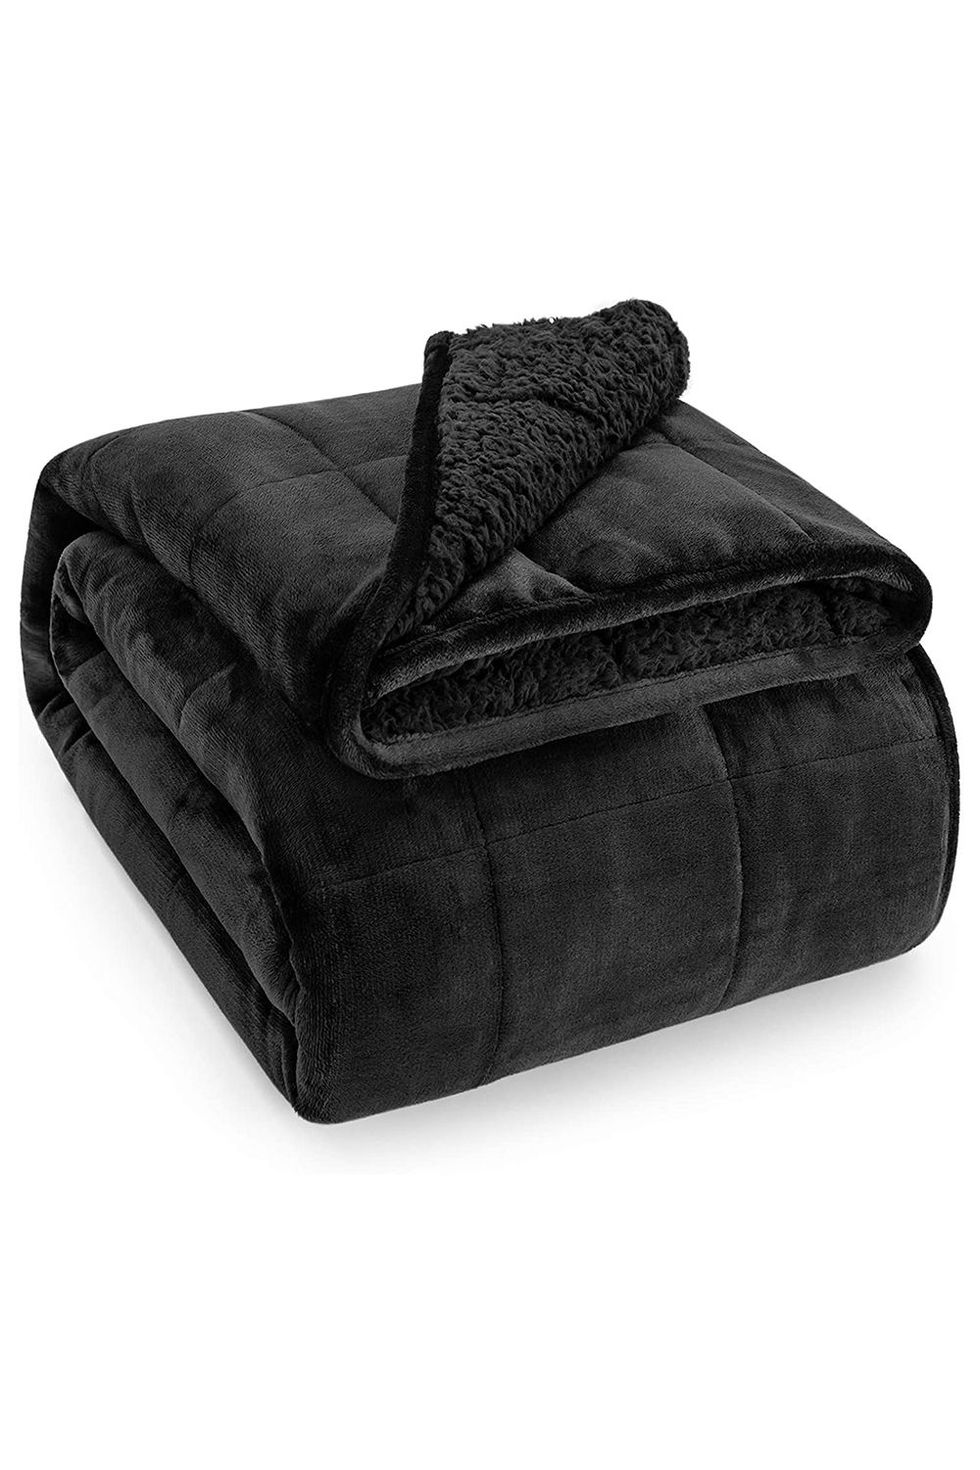 Sherpa Fleece Weighted Blanket for Adults 